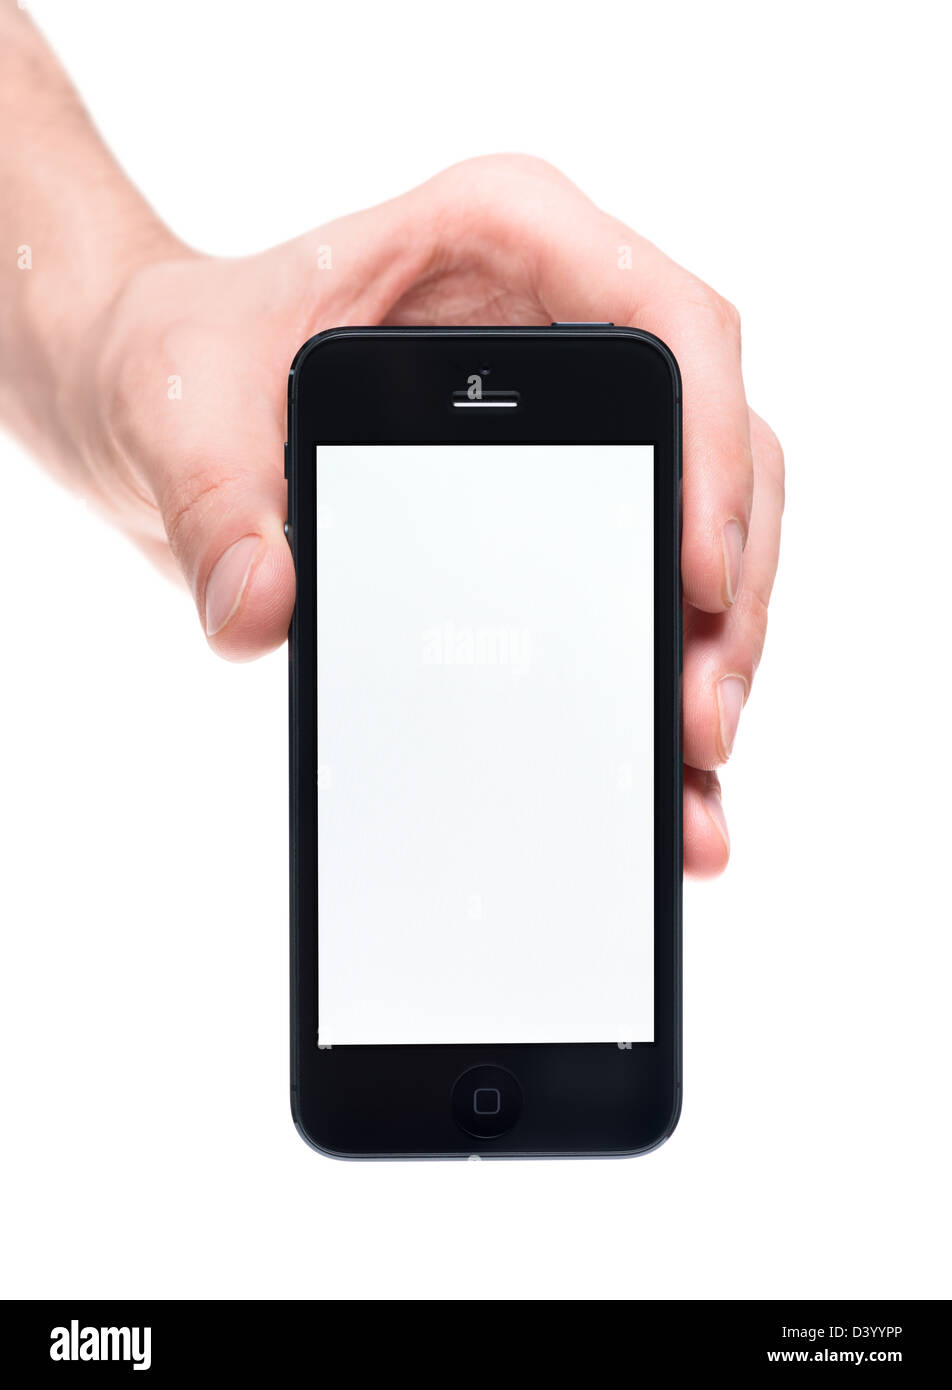 an hand holding new black Apple iPhone 5 with blank screen. Stock Photo